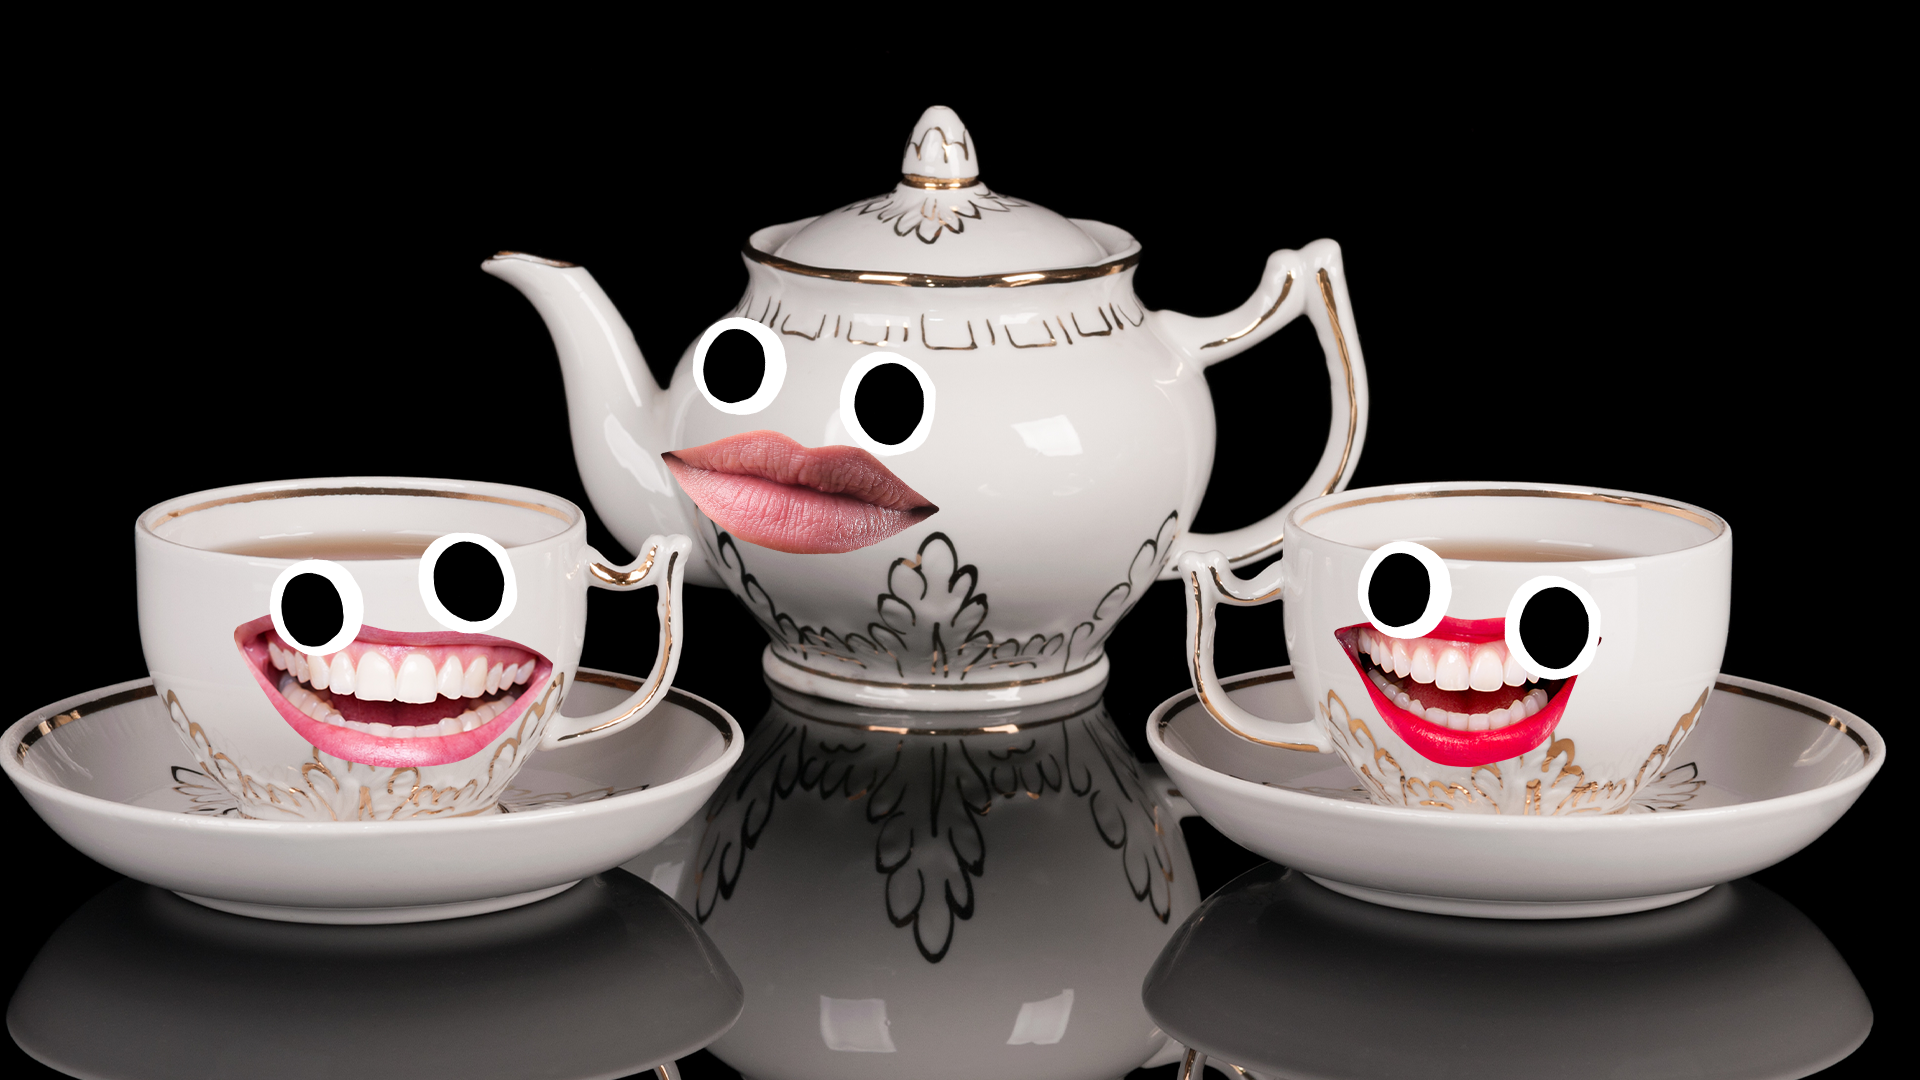 Teapot and teacups with goofy faces